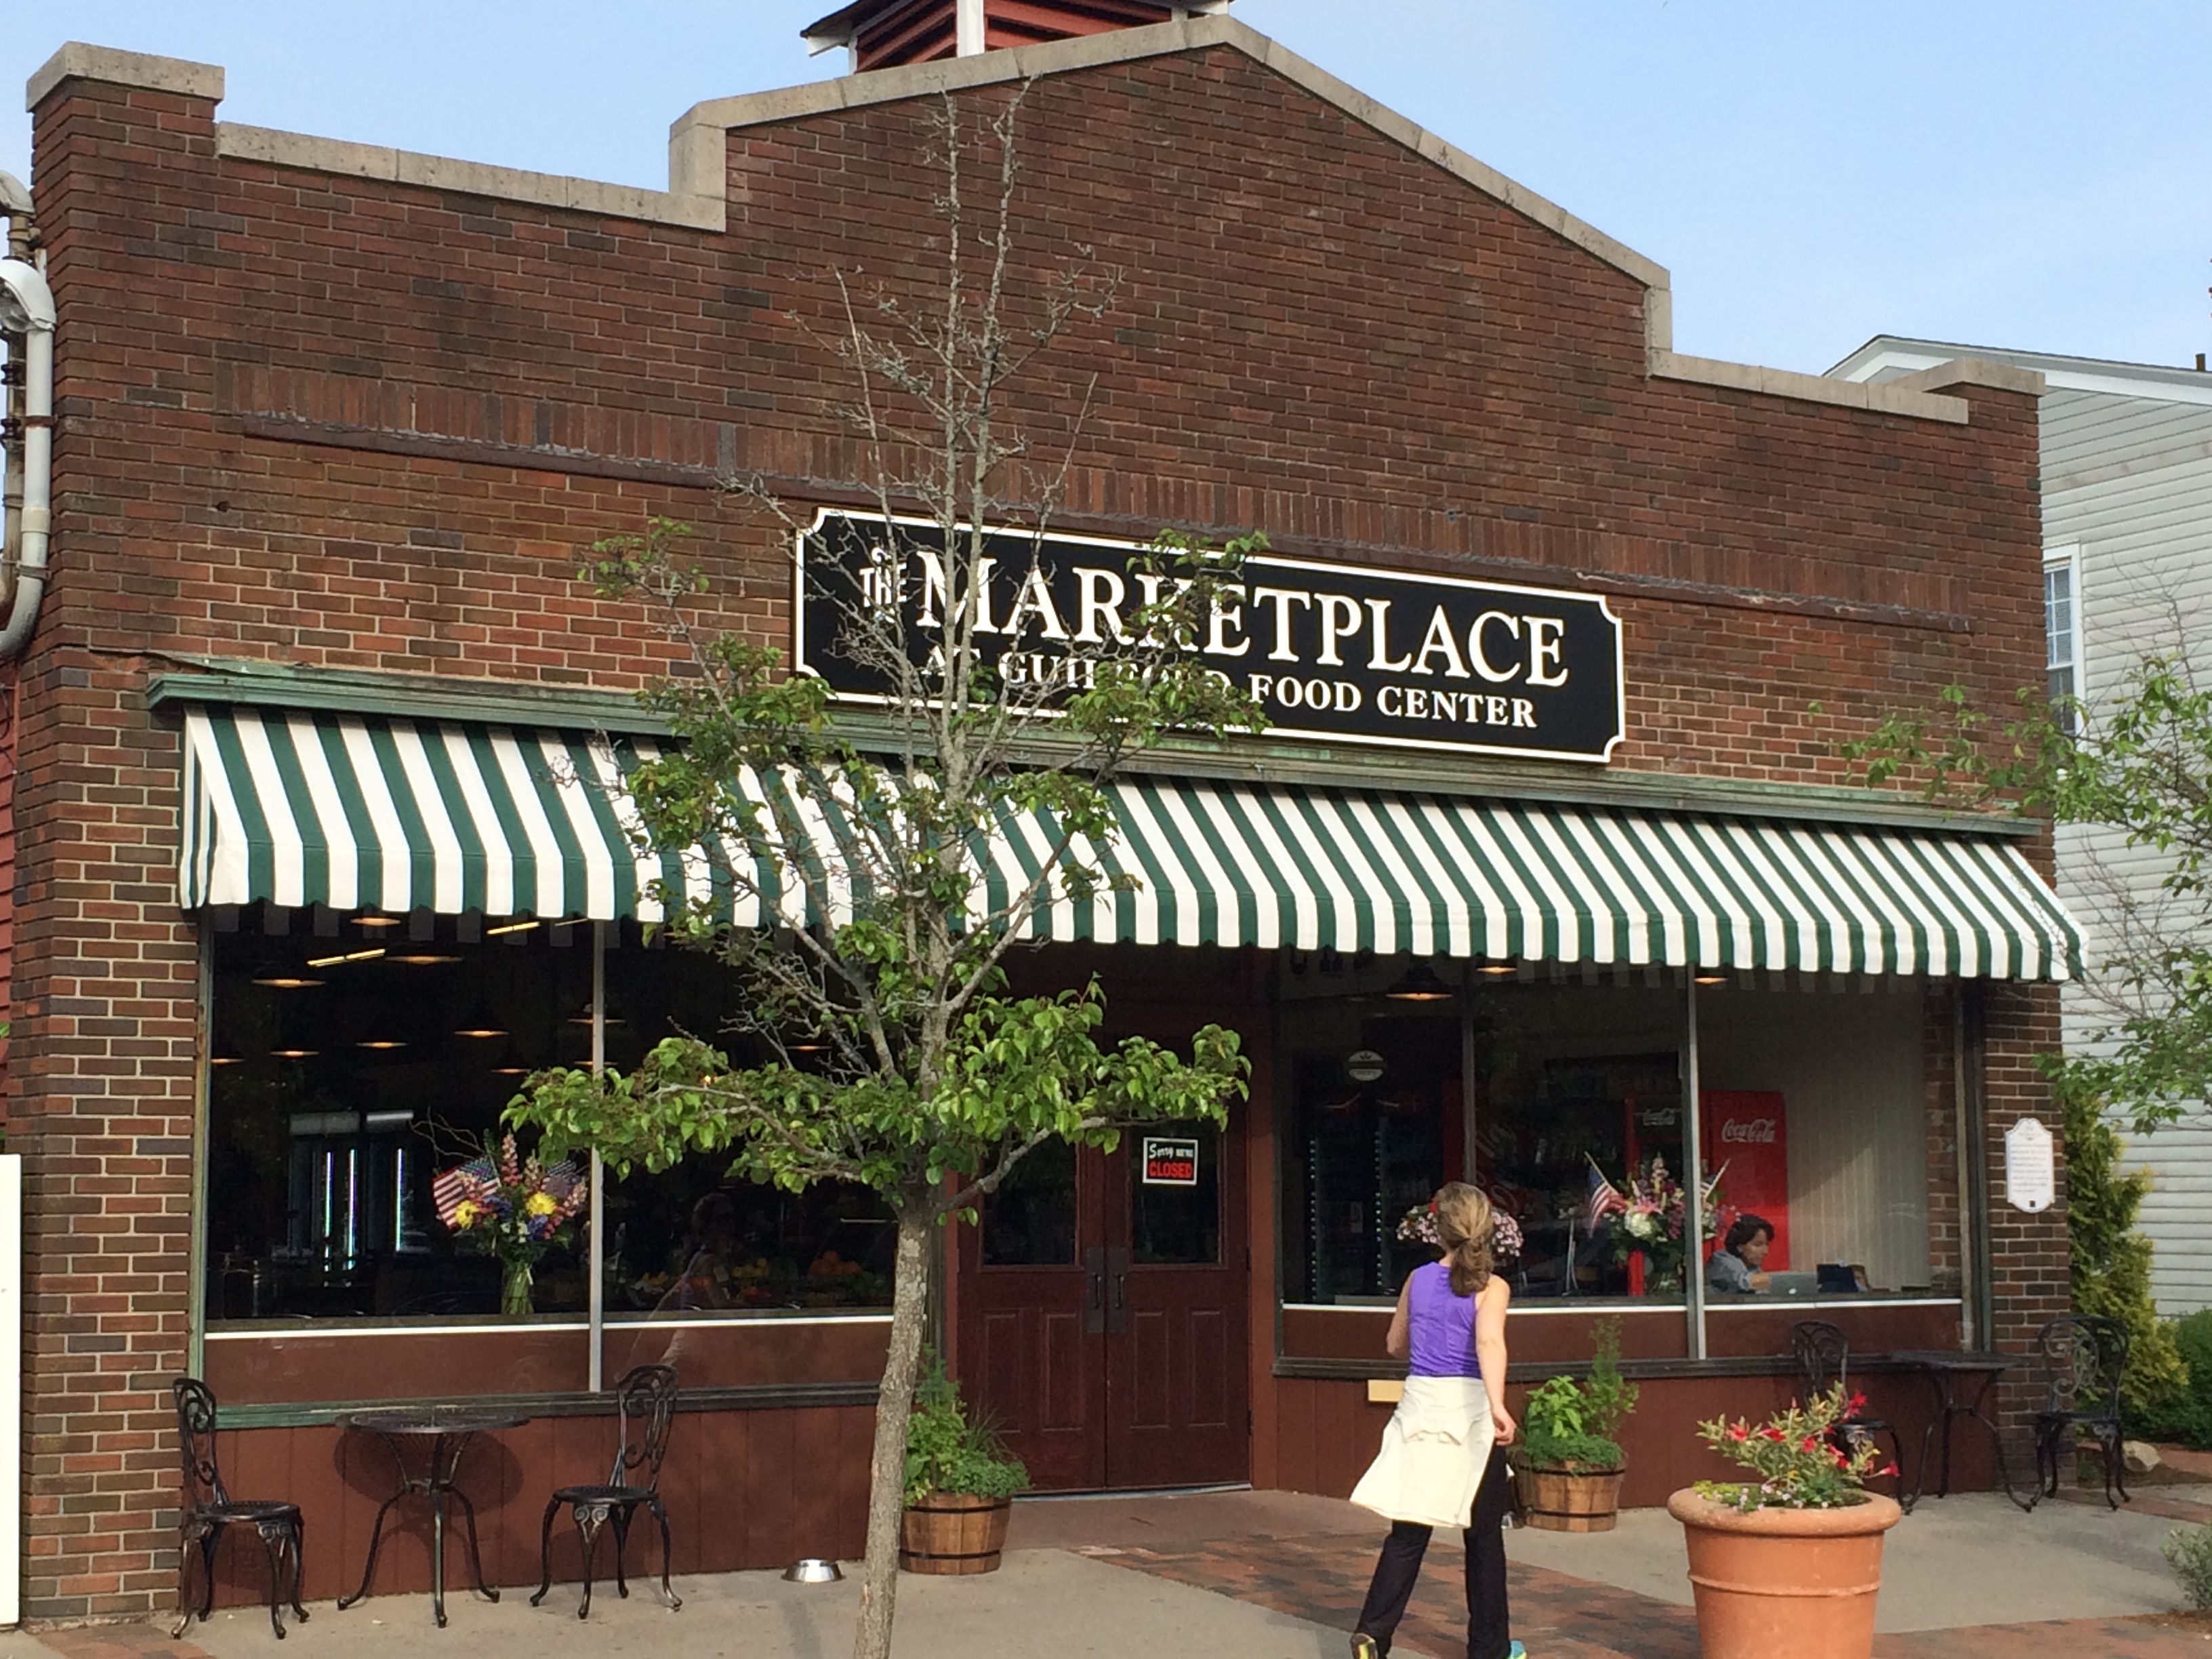 Sign we created for The Marketplace at Guilford Food Center